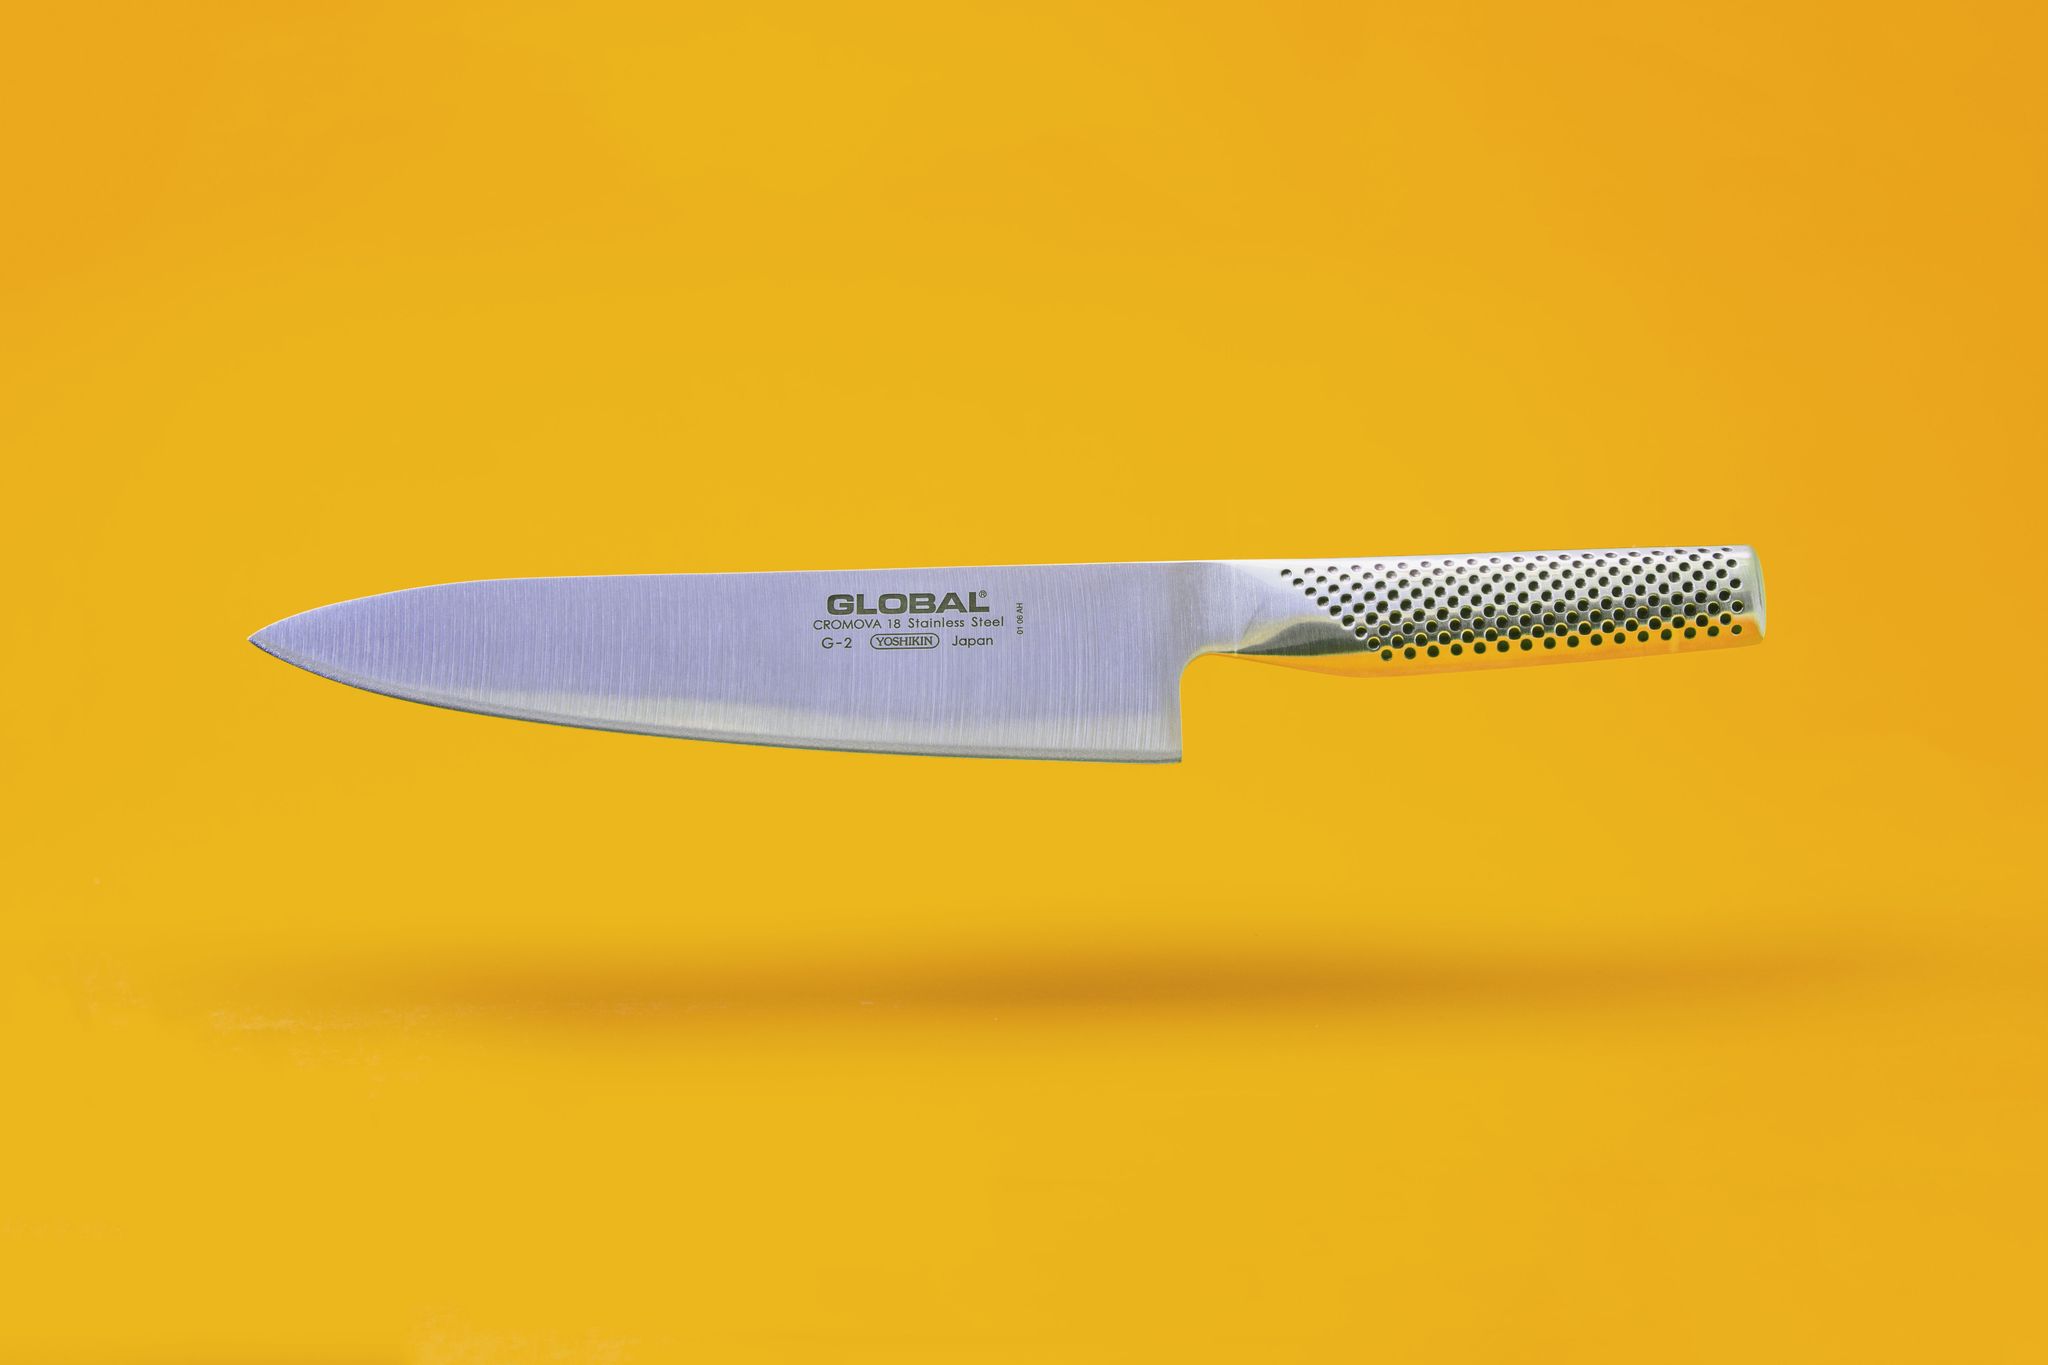 Knife and Cutlery 2018 | The Strategist